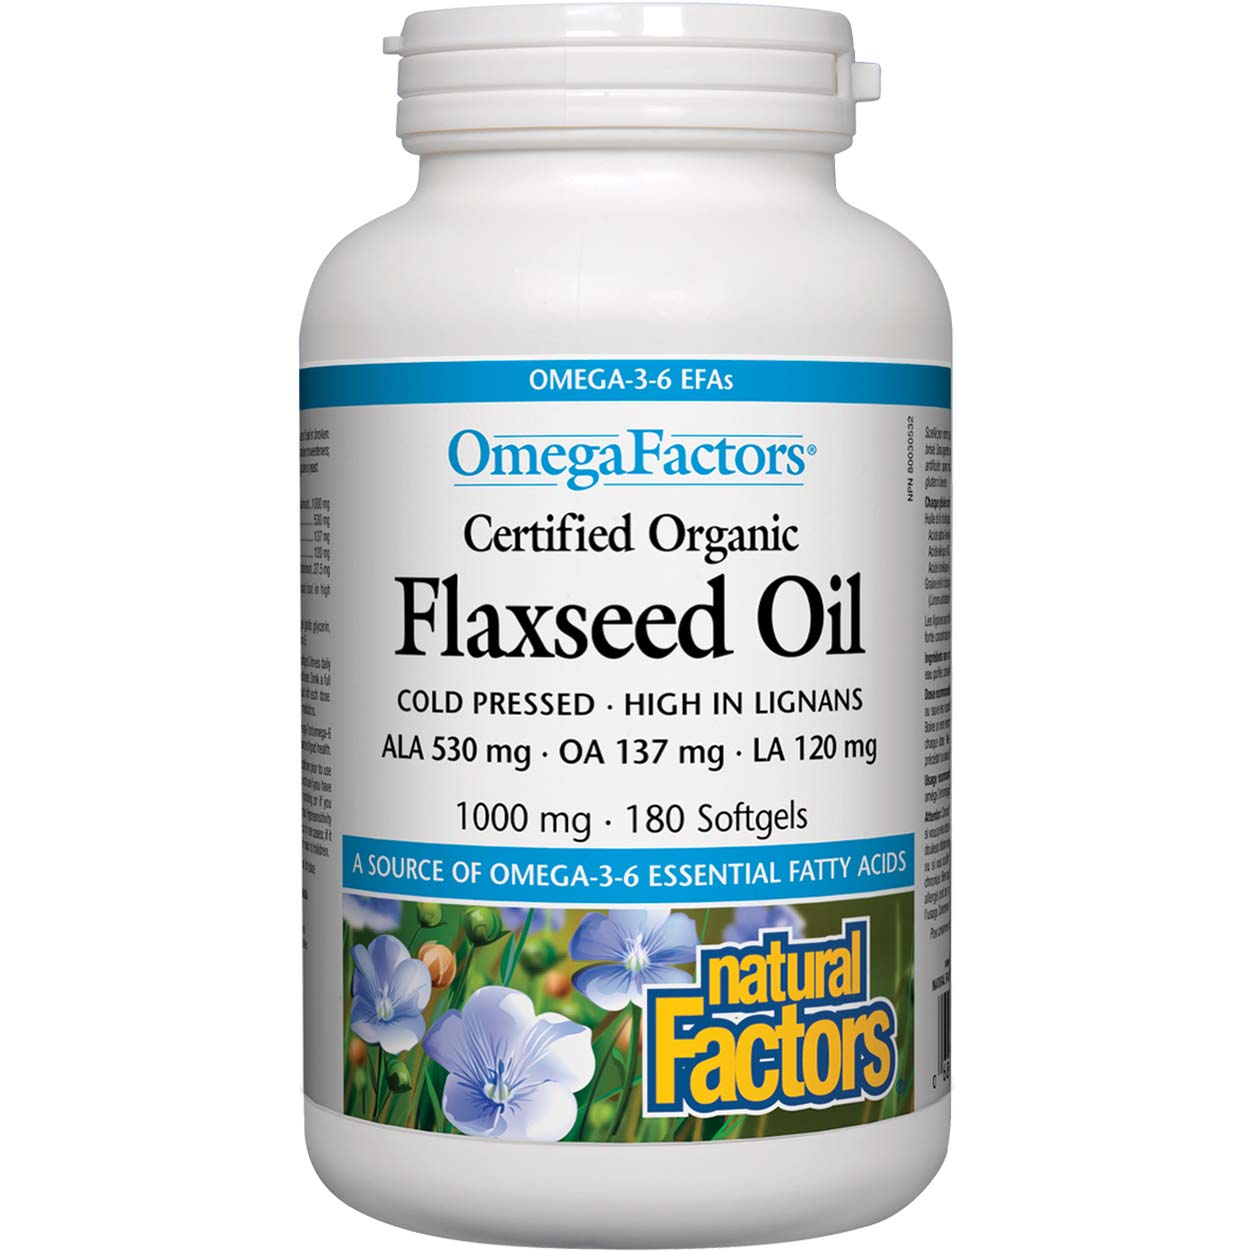 Natural Factors Flaxseed Oil Certified Organic 180 Softgels 1000 mg